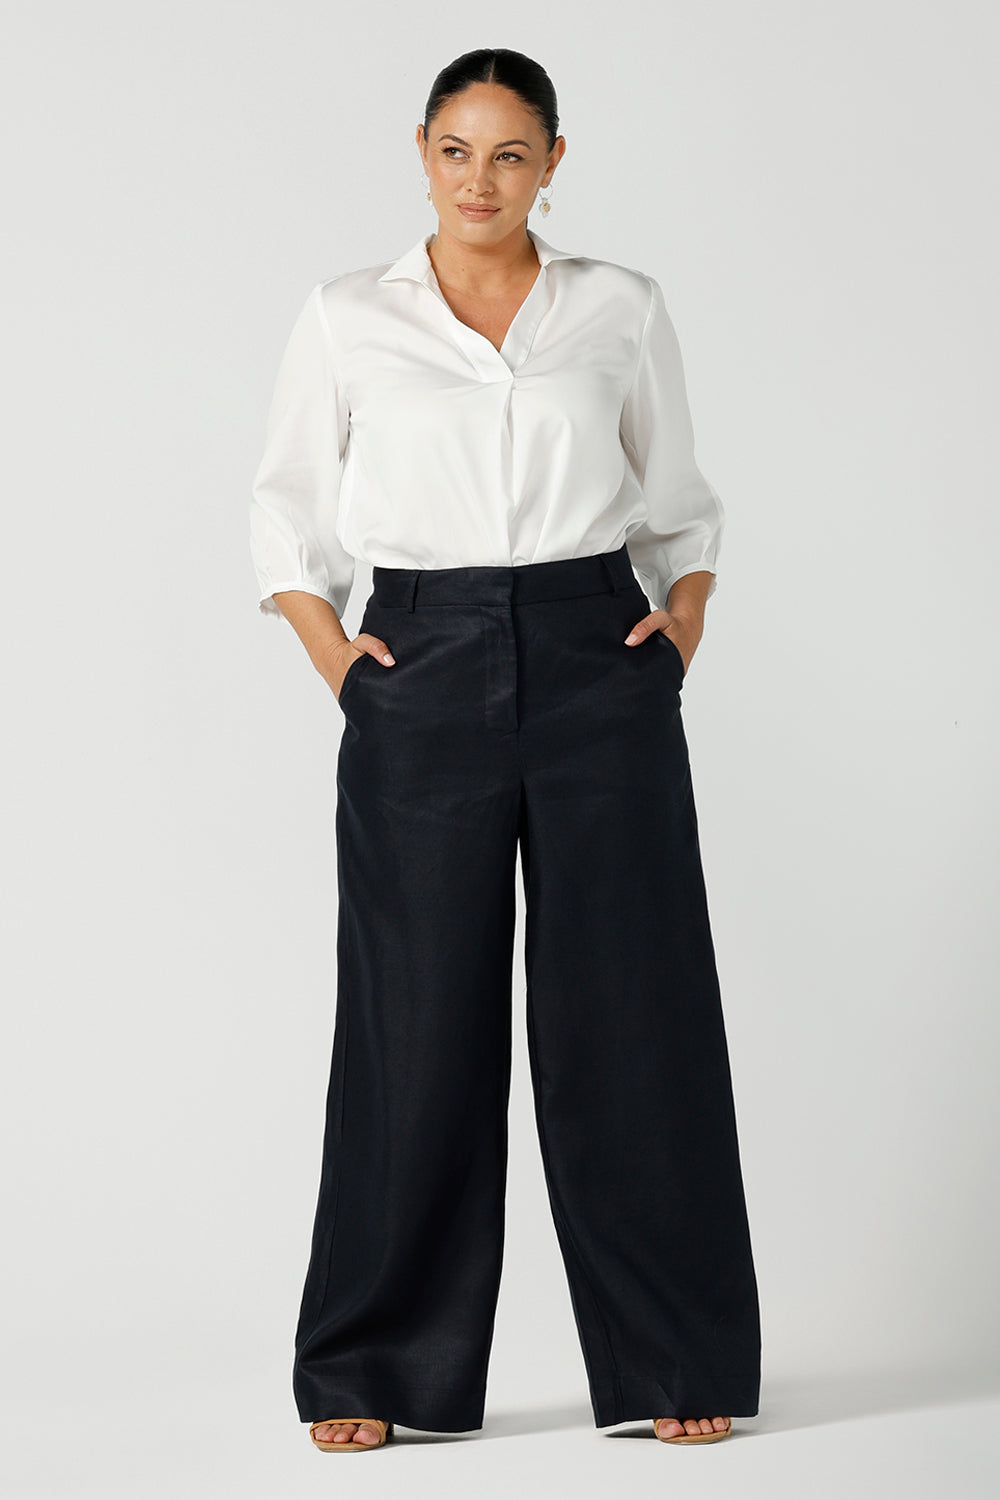 A size 12 woman wears a tailored linen pant in 100% linen. Breathable linen fabrication in striking deep midnight navy colour. The perfect workwear pants with pockets that make great summer pants. Styled with white workwear shirt in tencel. Size inclusive fashion designed and made in Australia size 8 - 24. 